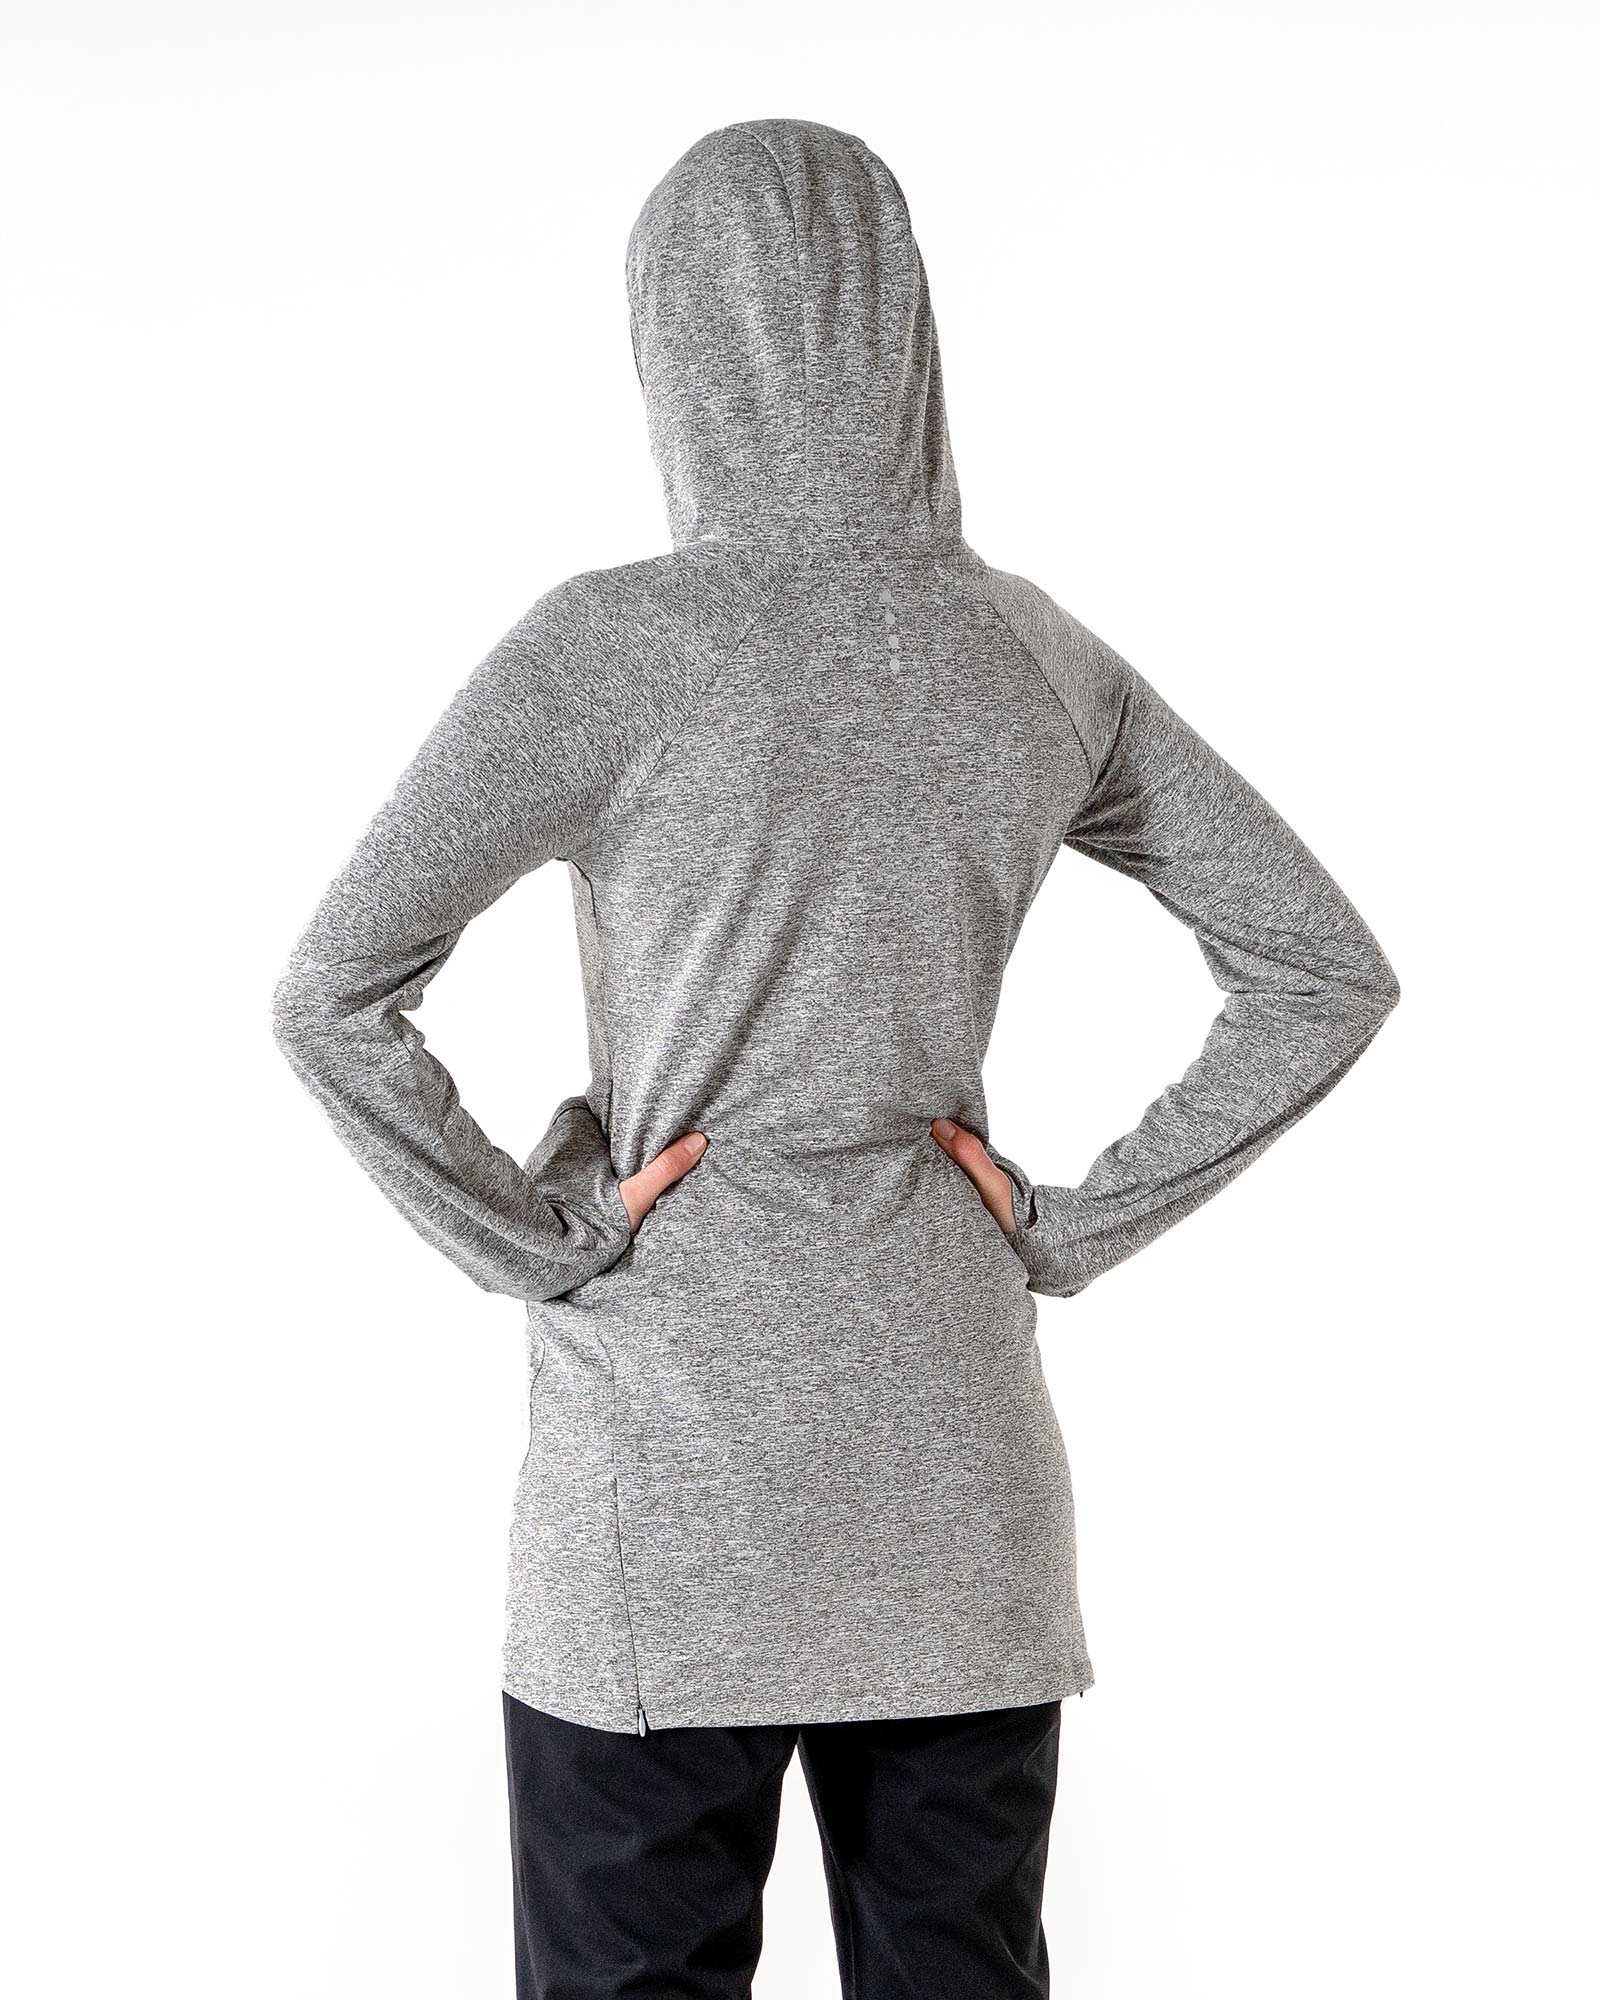 Halo Running Hoodie in heathered grey by Veil Garments. Modest activewear collection.